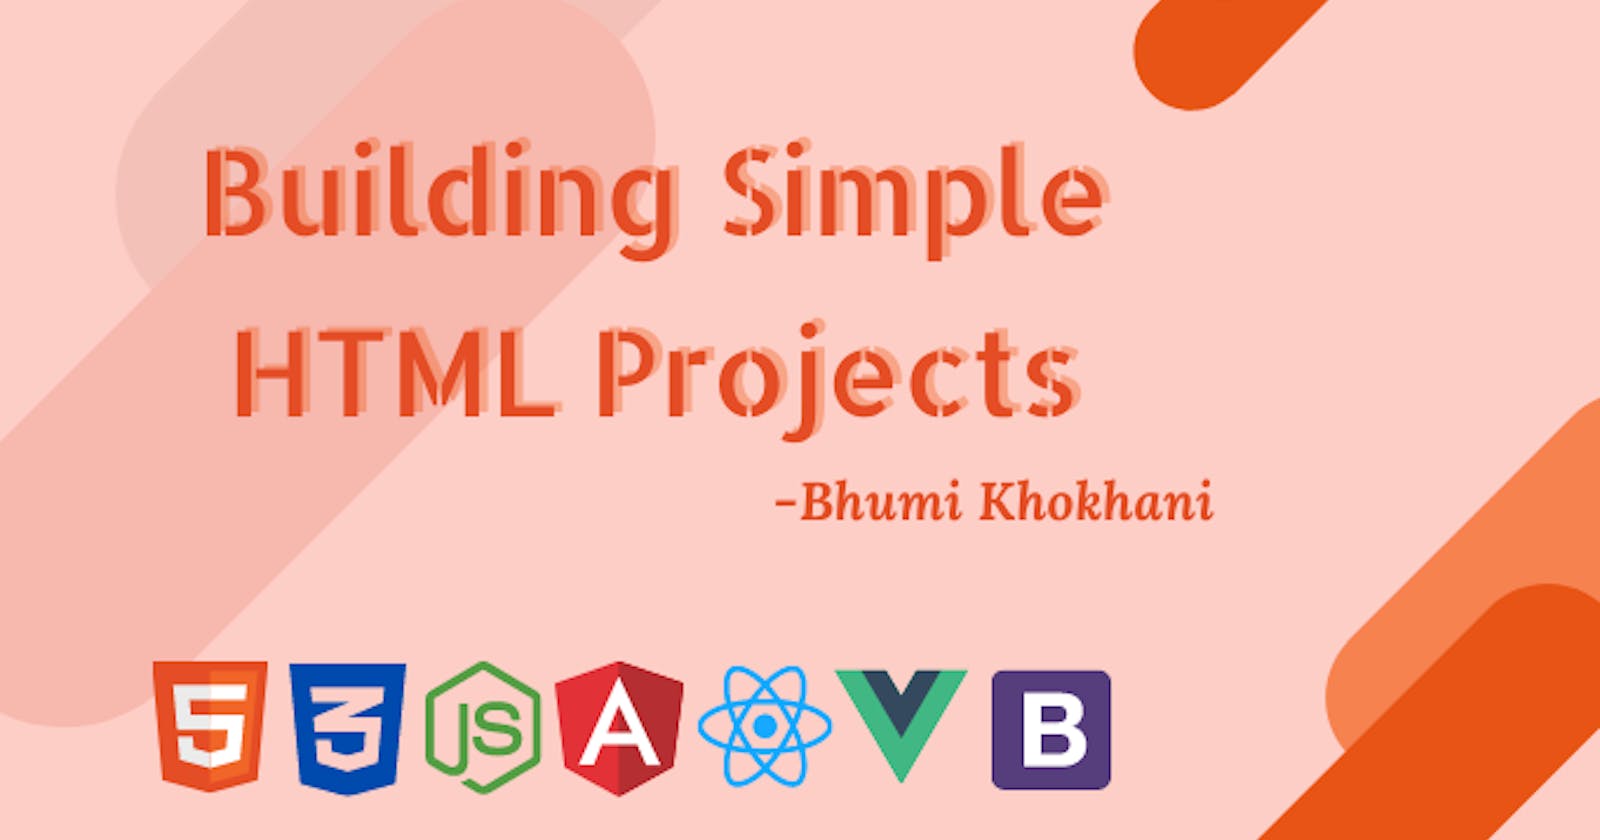 Building Simple HTML Projects